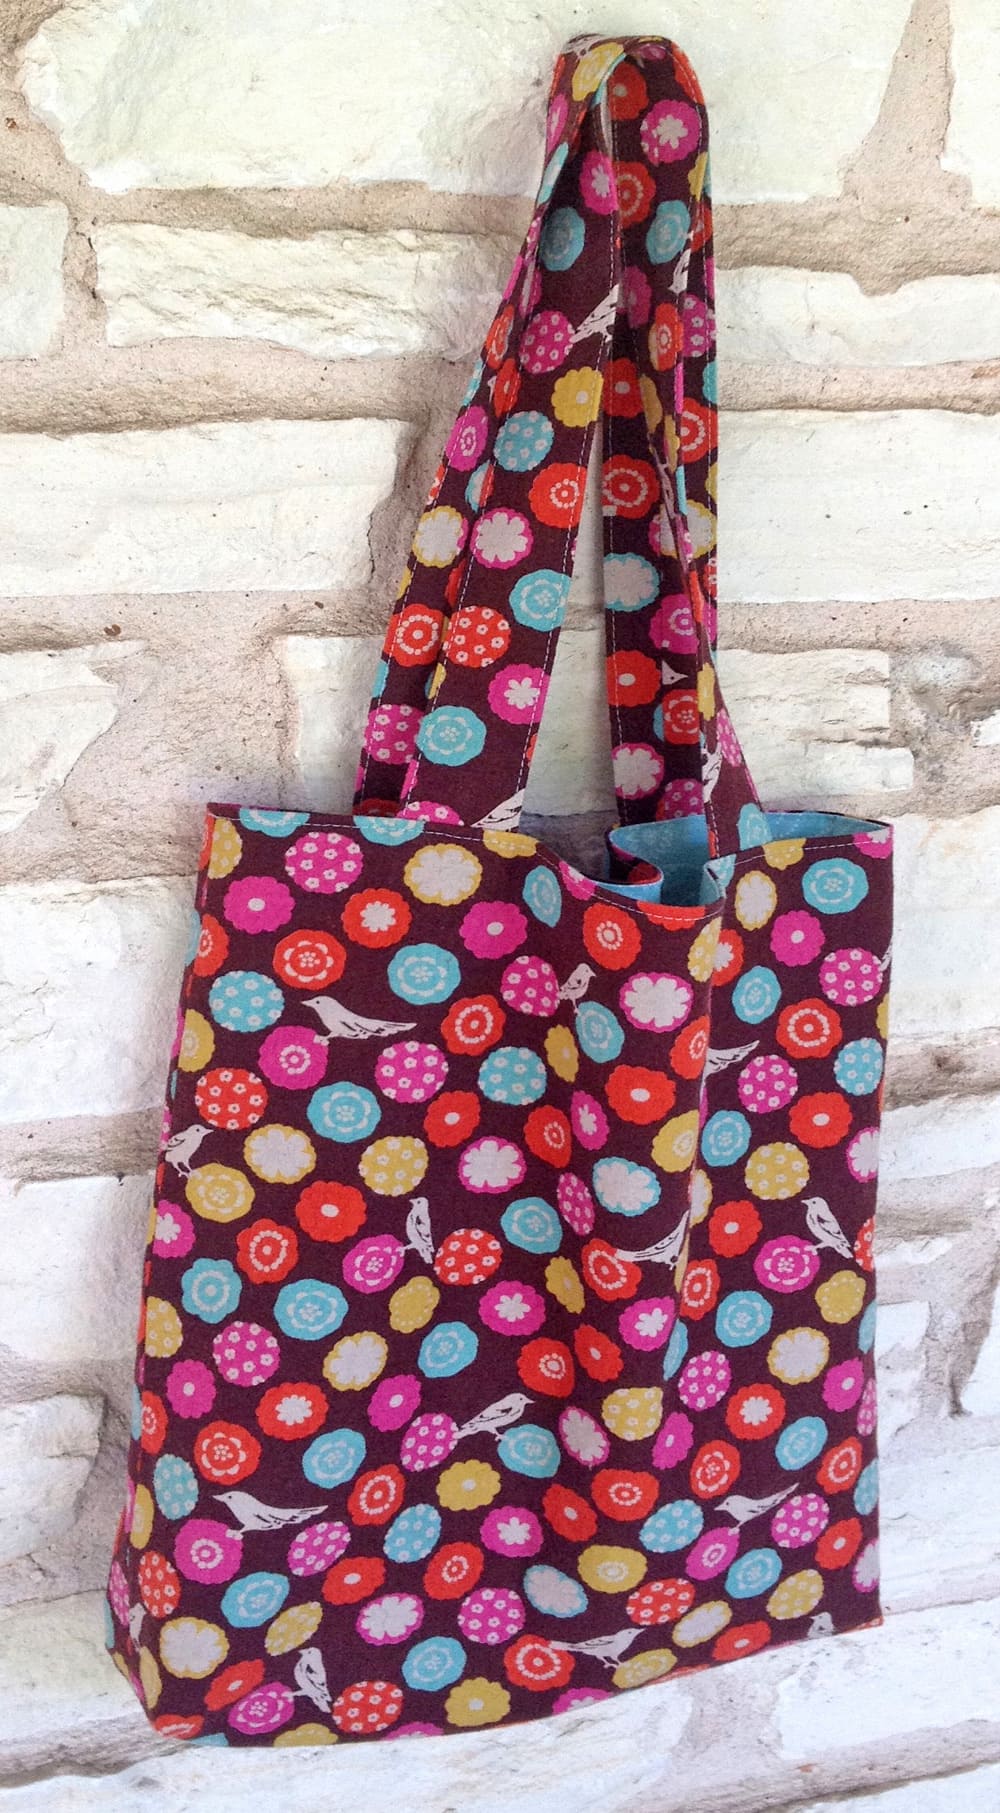 Rock the Tote: Tutorial + Pattern